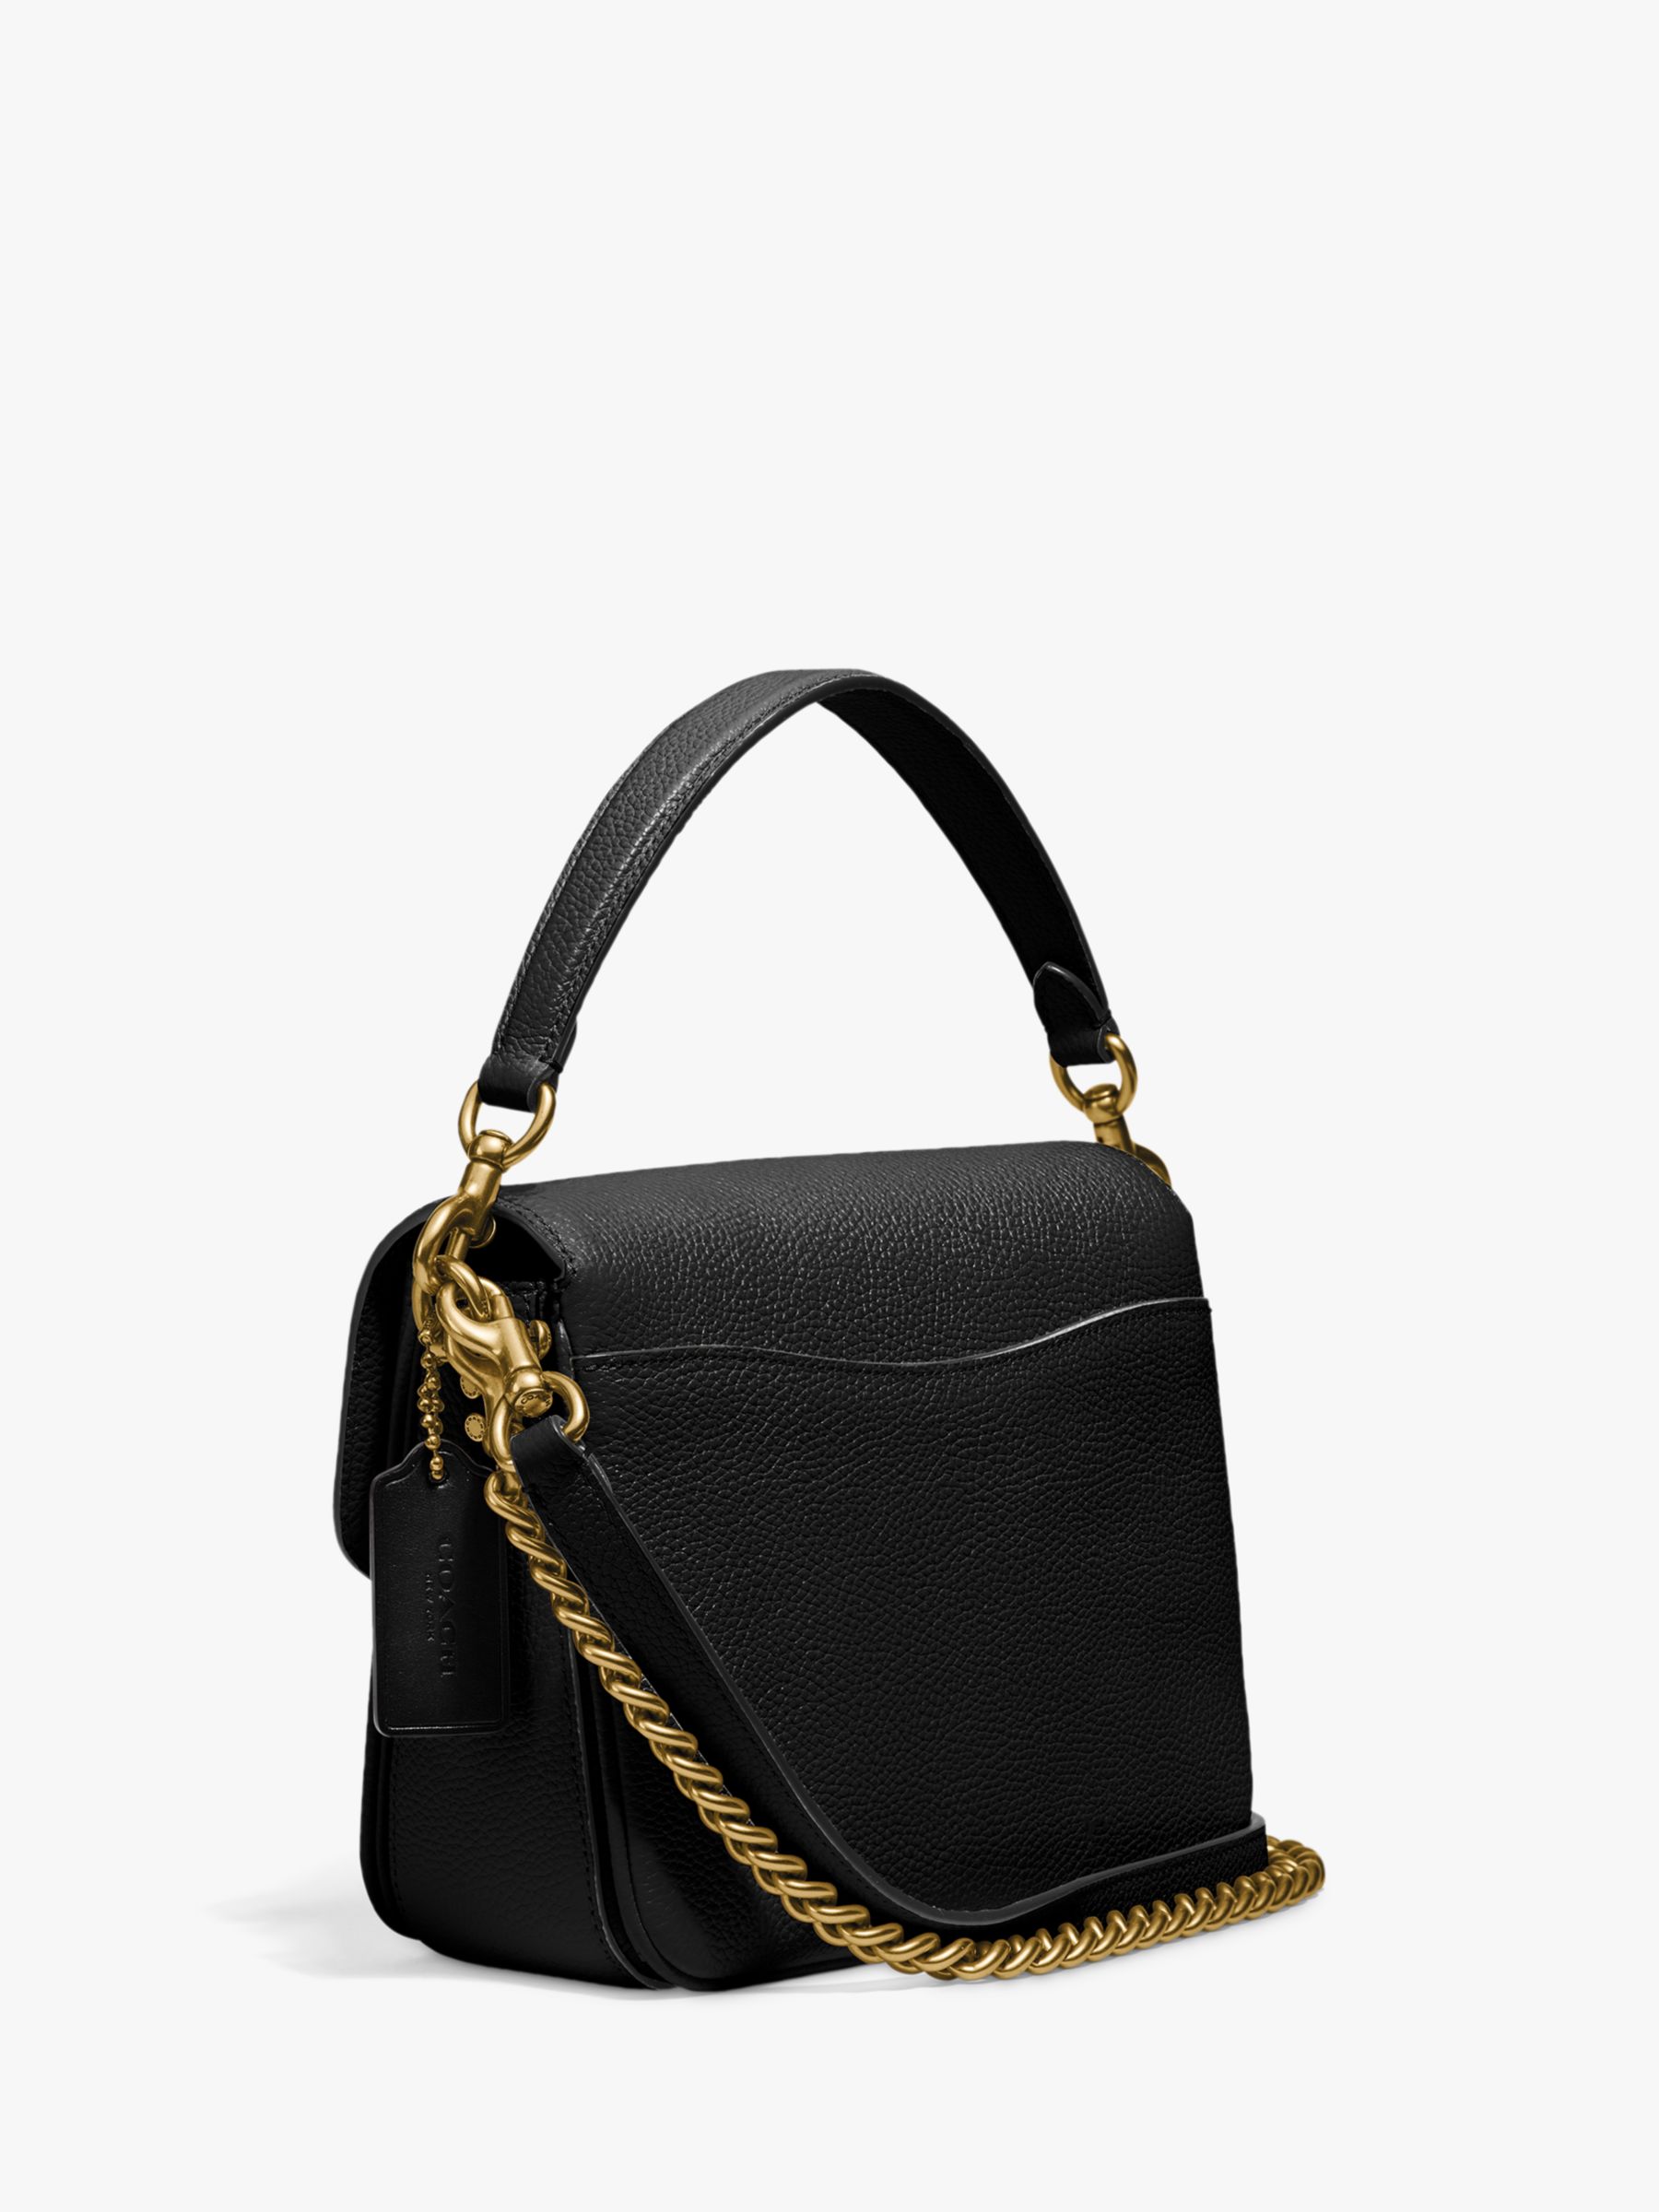 Coach Cary Leather Cross Body Bag, Black/Gold at John Lewis & Partners